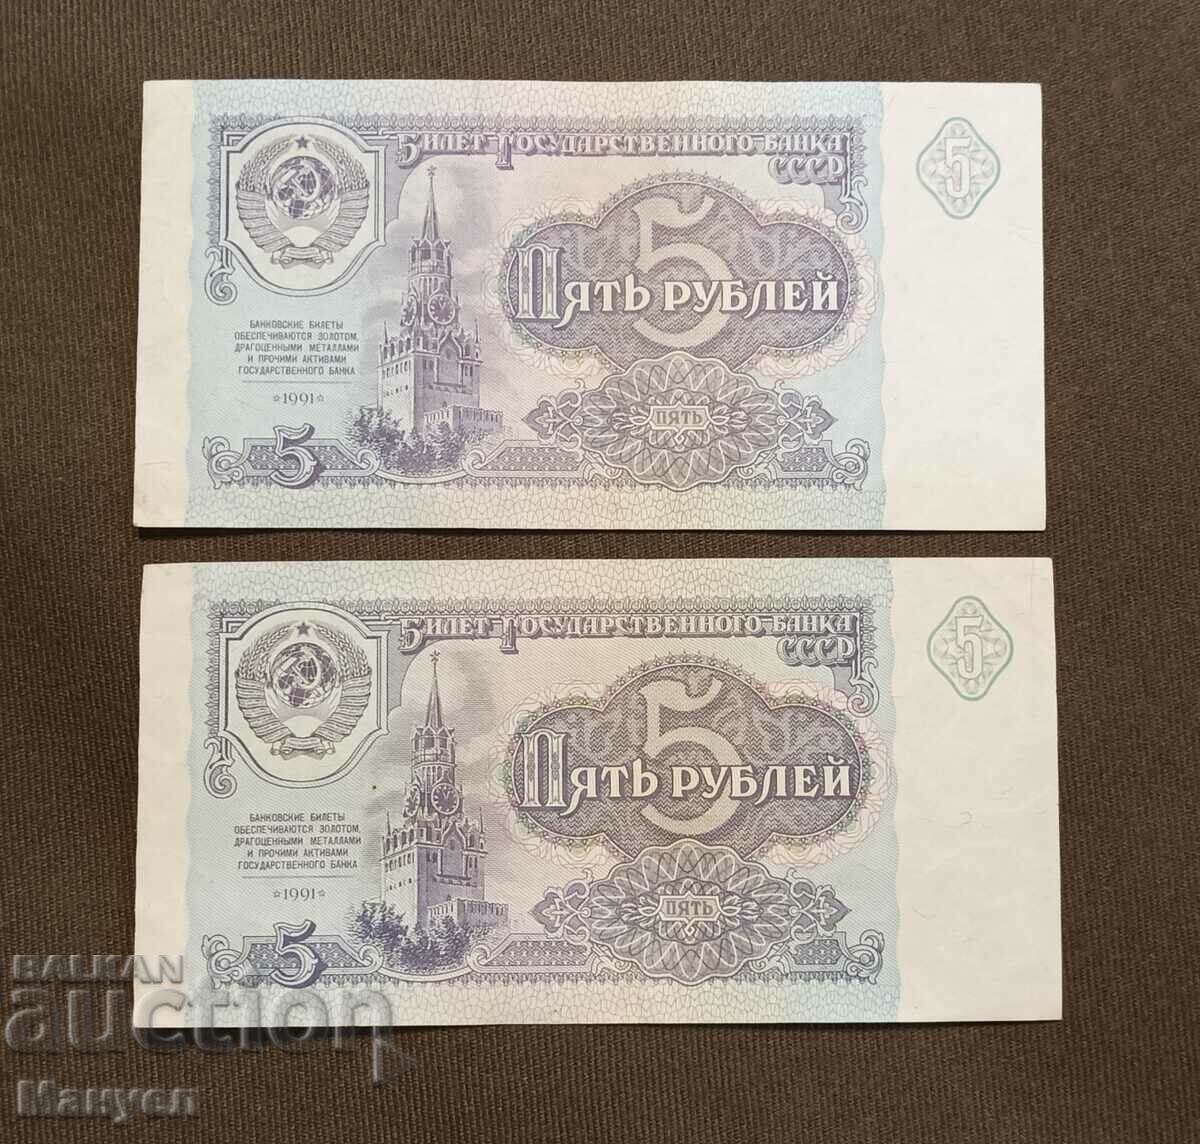 I am selling 5 rubles, 1991 - 2 pieces.